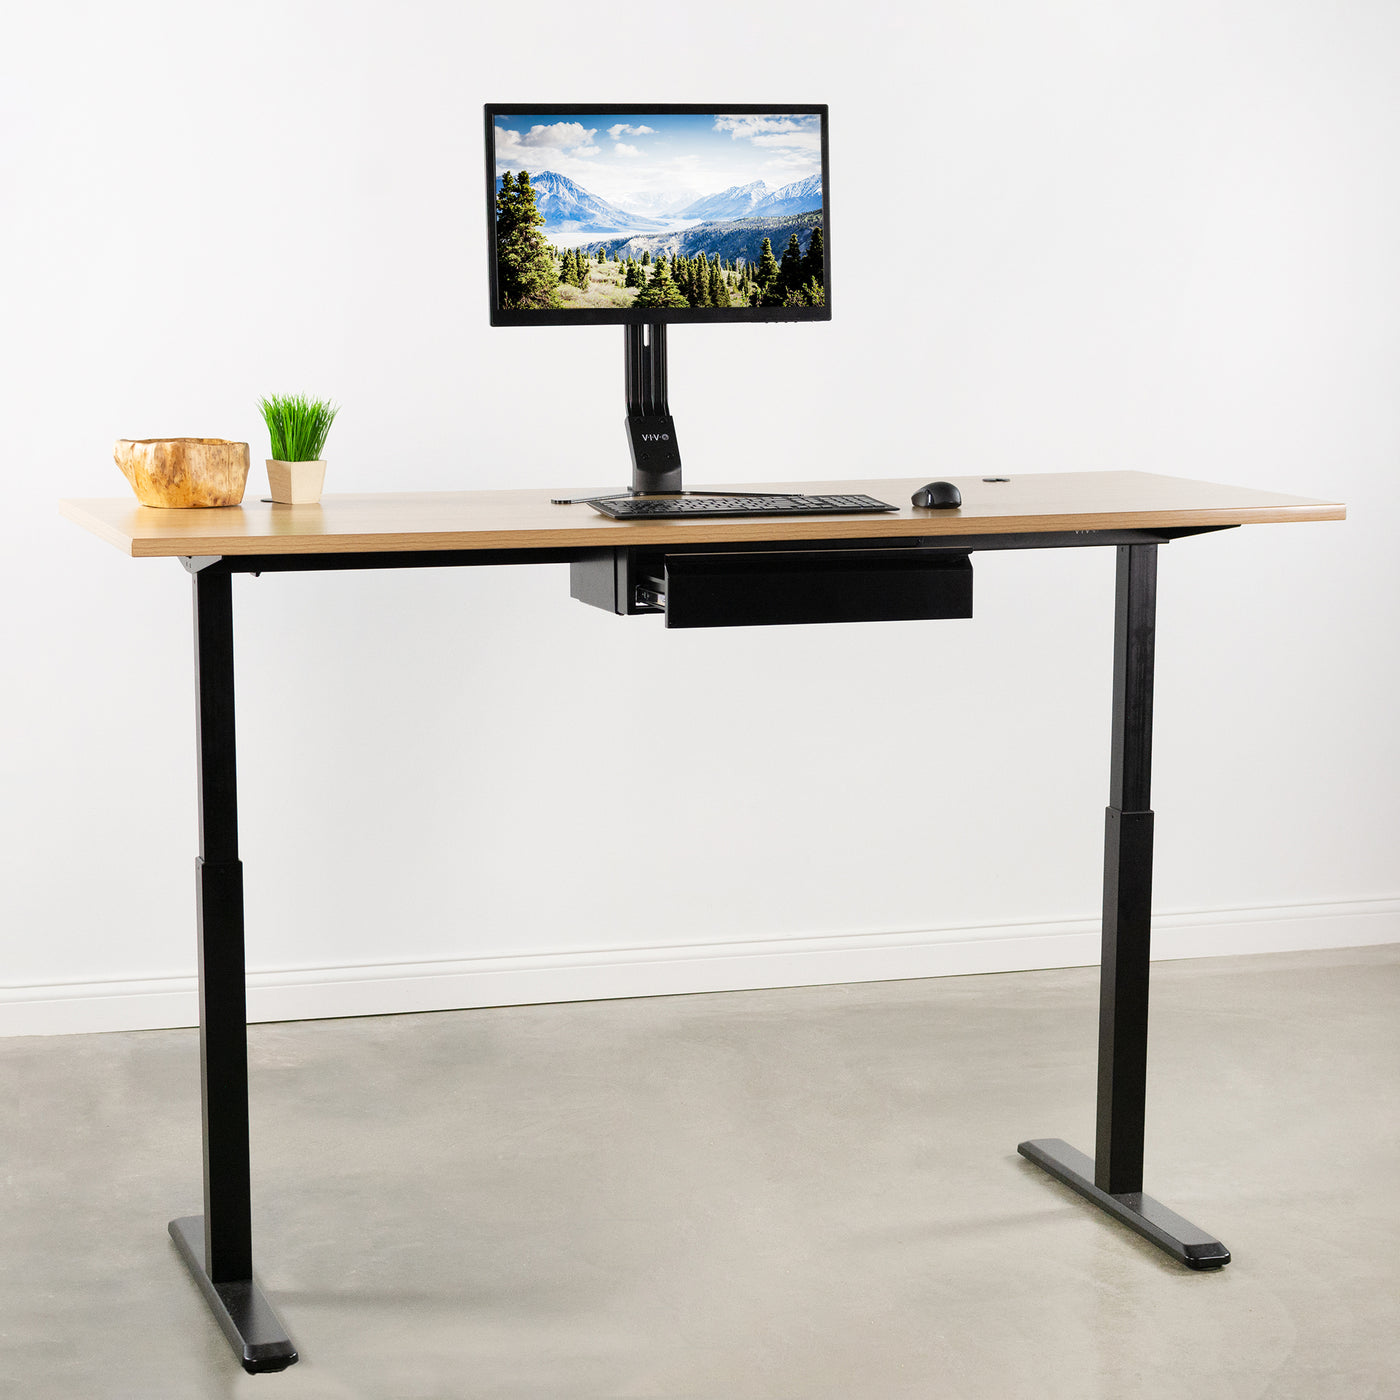 Standing desk with a mounted desk organizer.